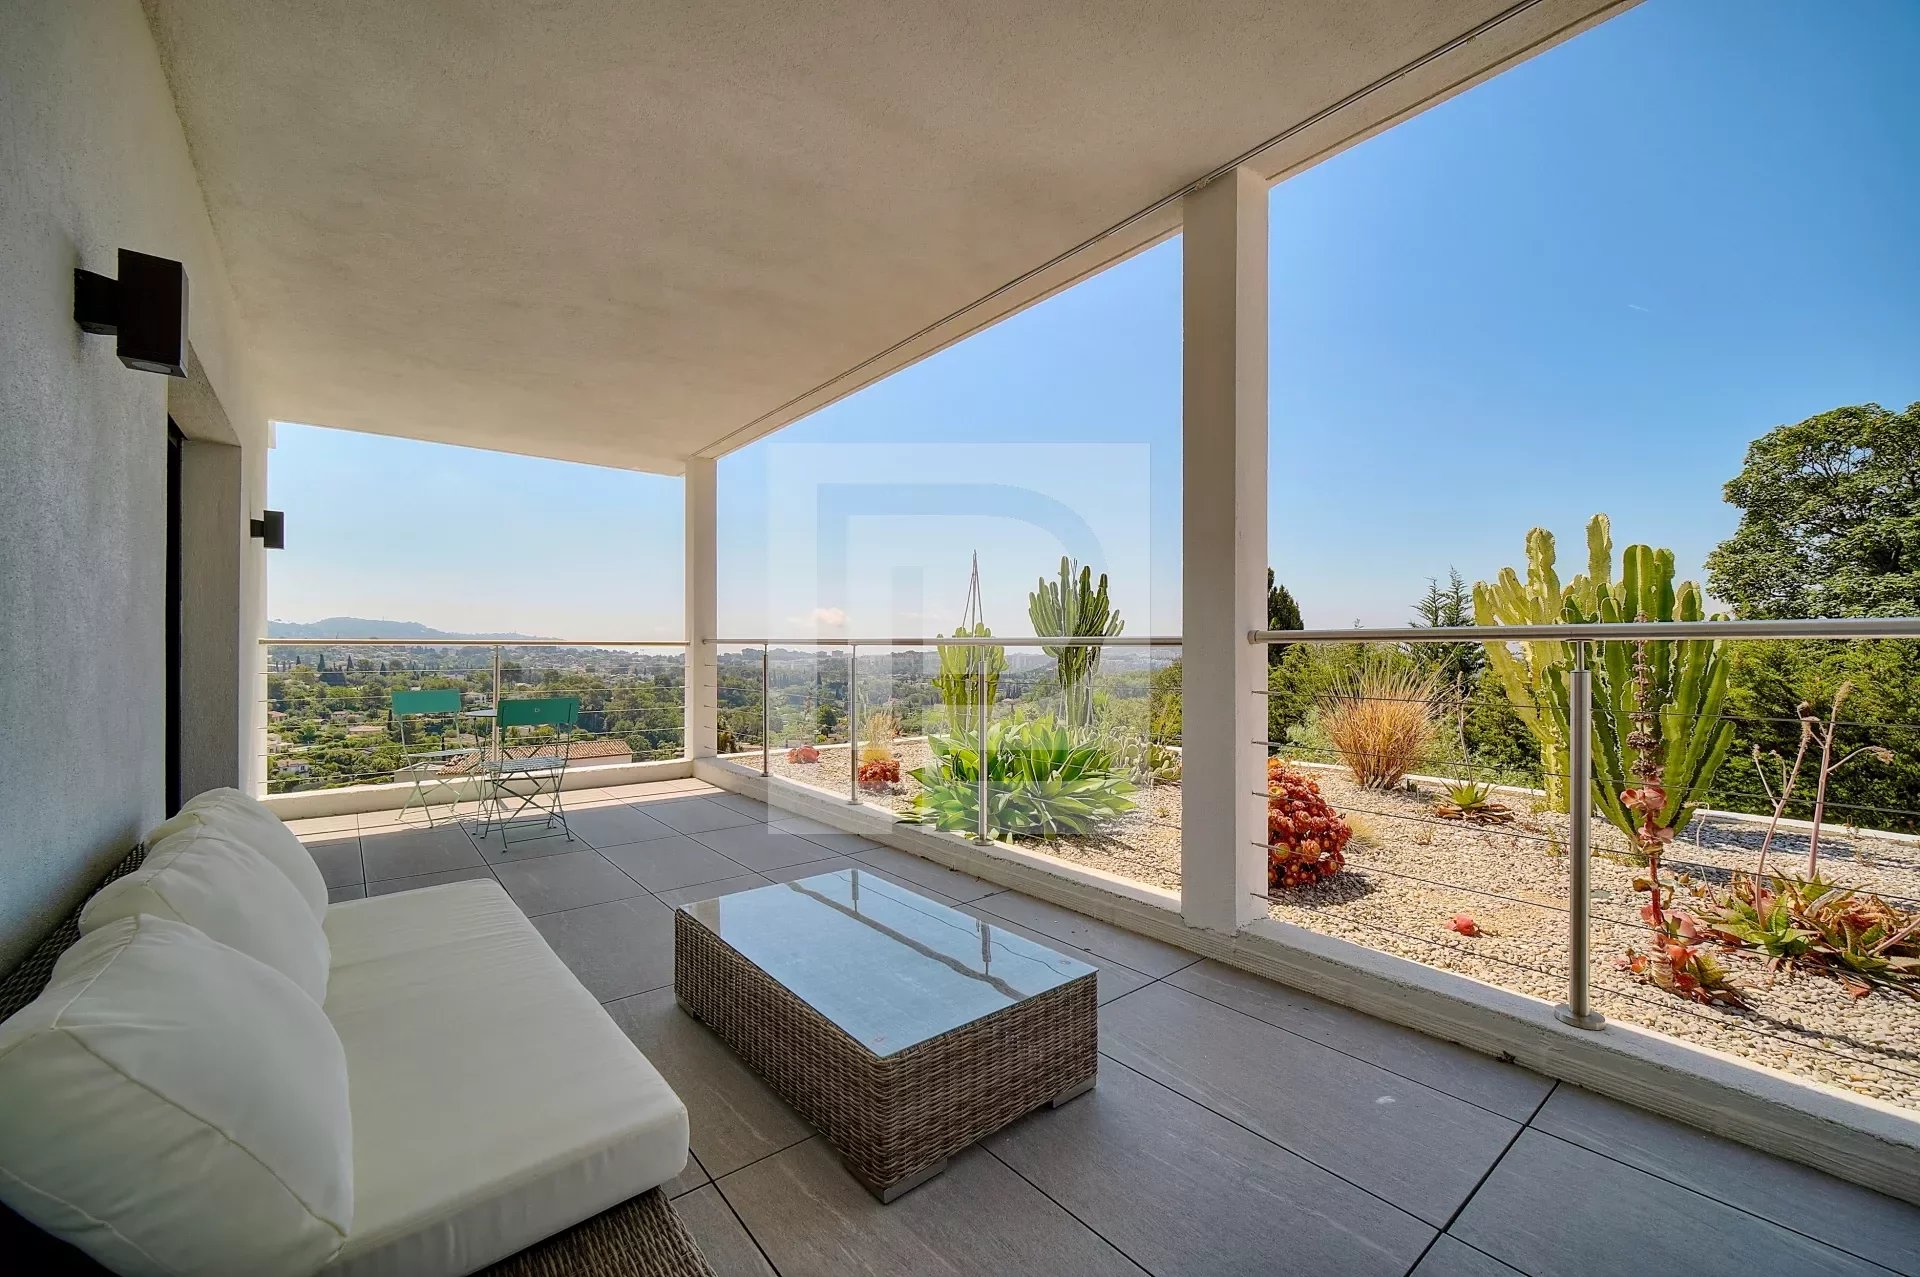 180 degree panoramic view for this superb modern